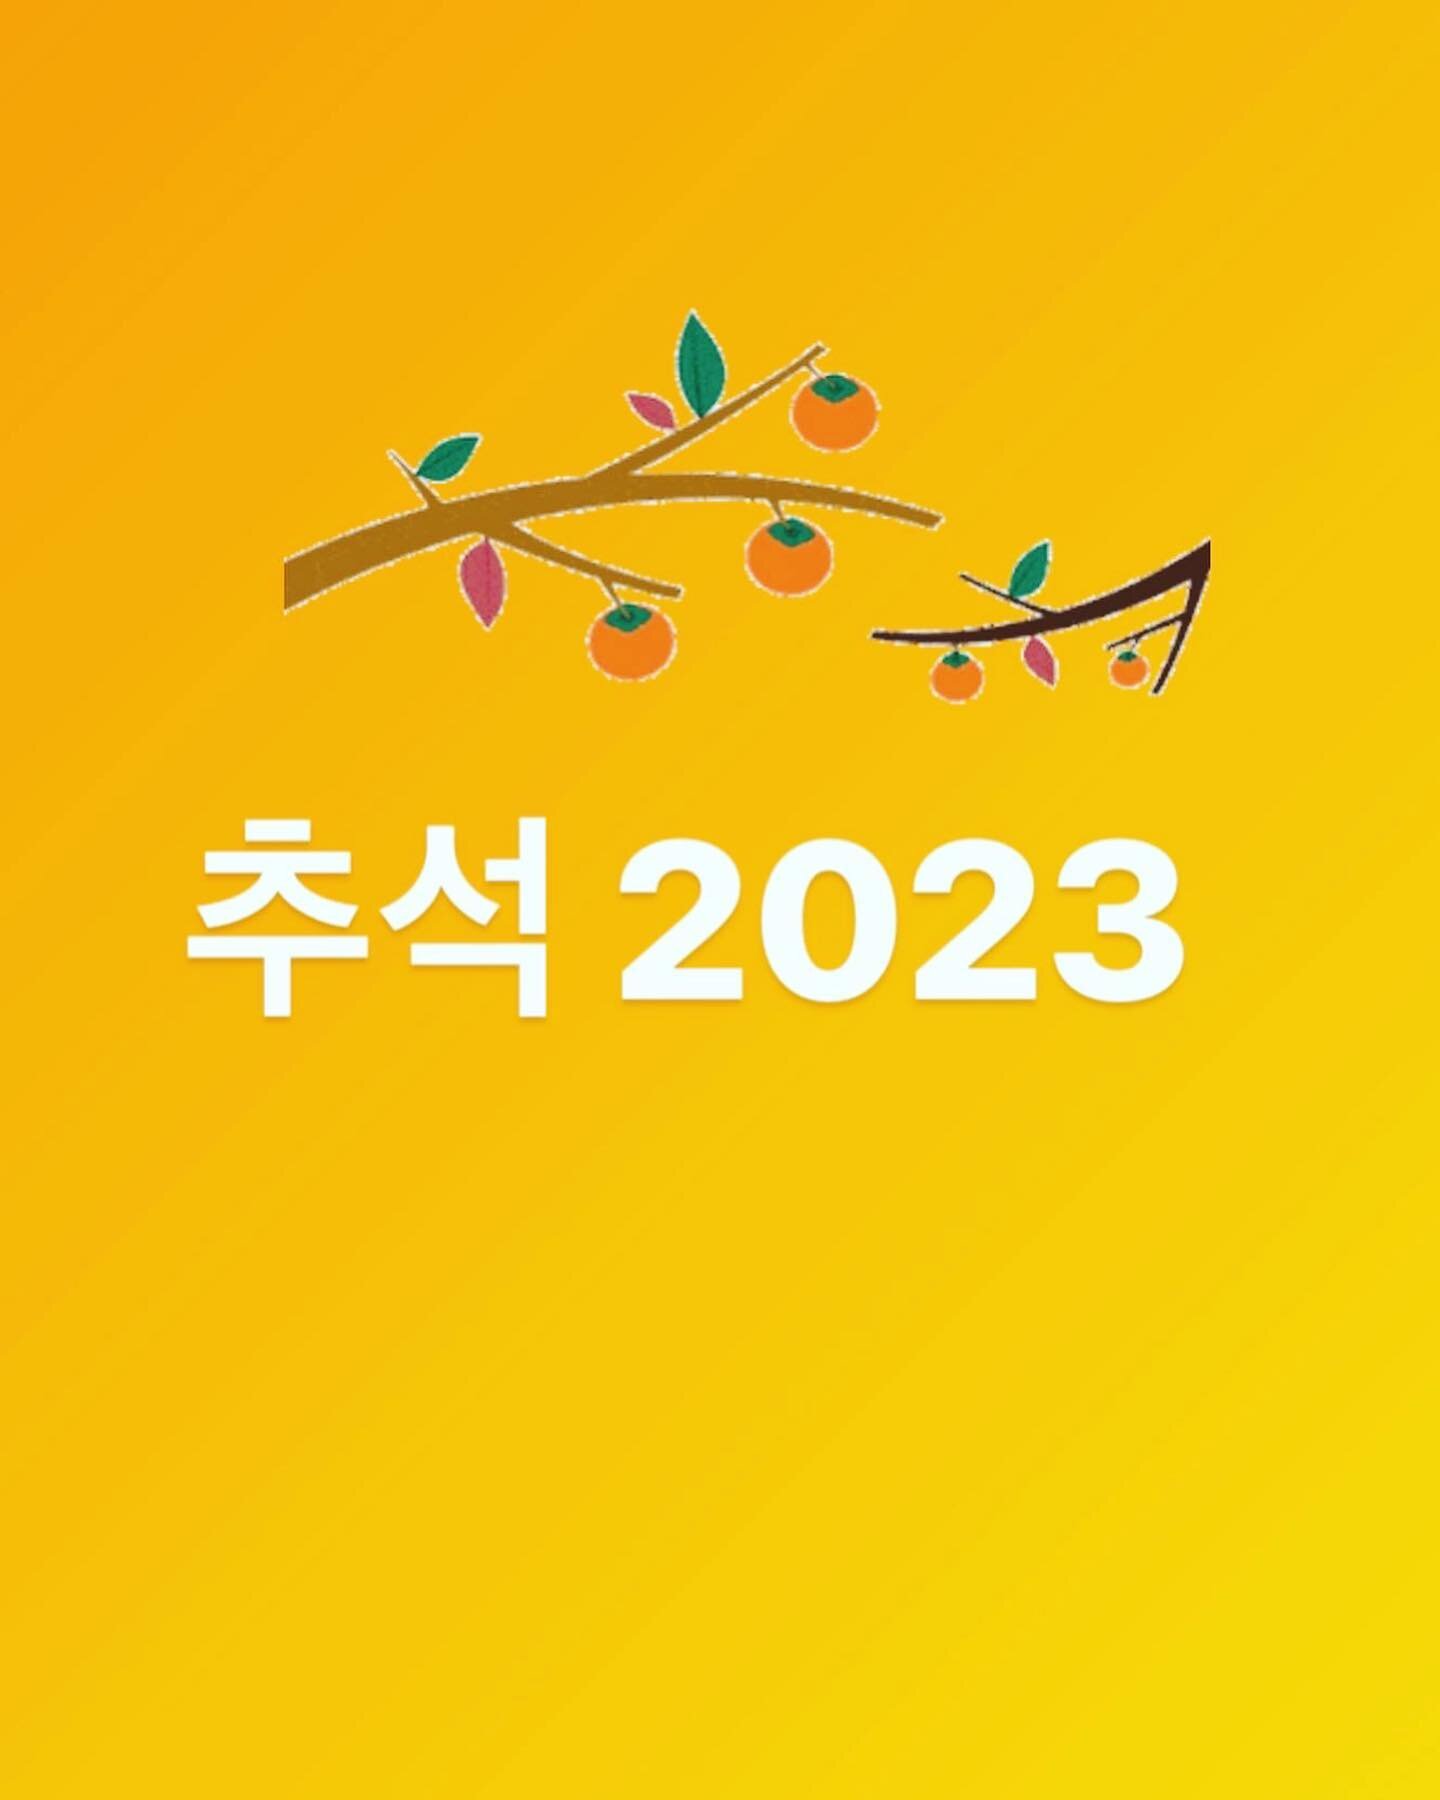 We had a great time celebrating 추석! #추석2023